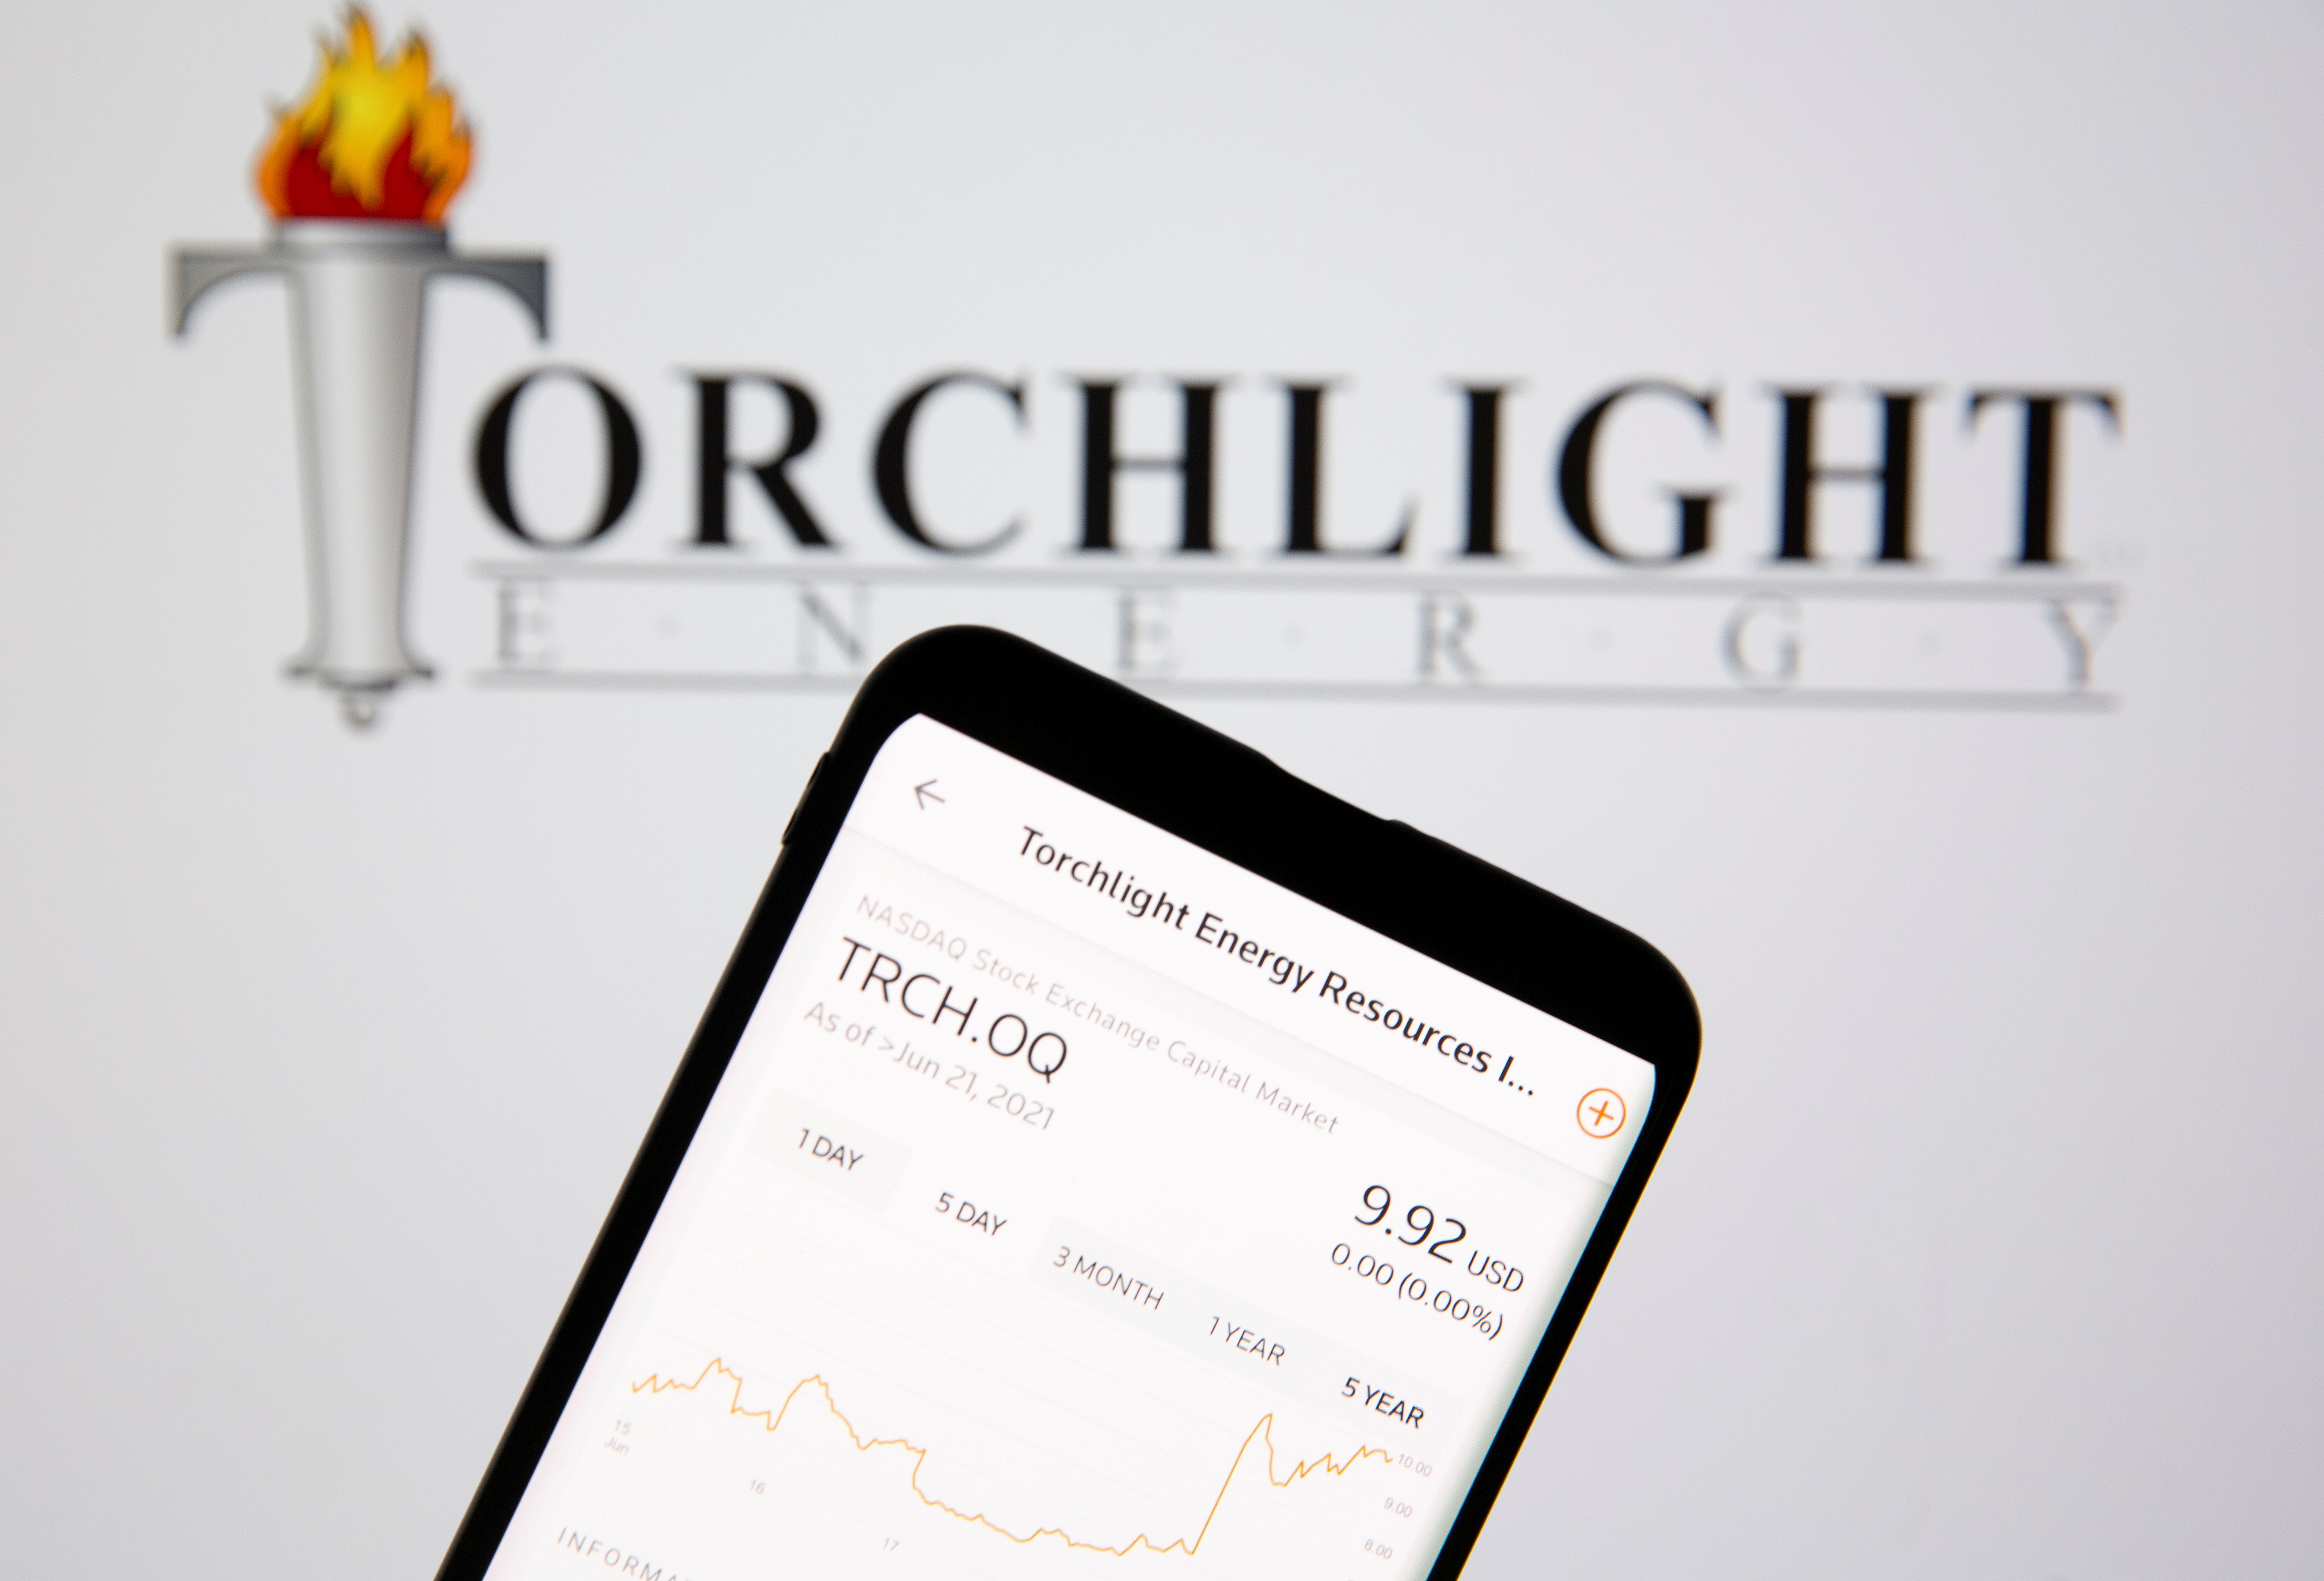 Torchlight energy stock graph is seen in front of the company's logo in this illustration picture